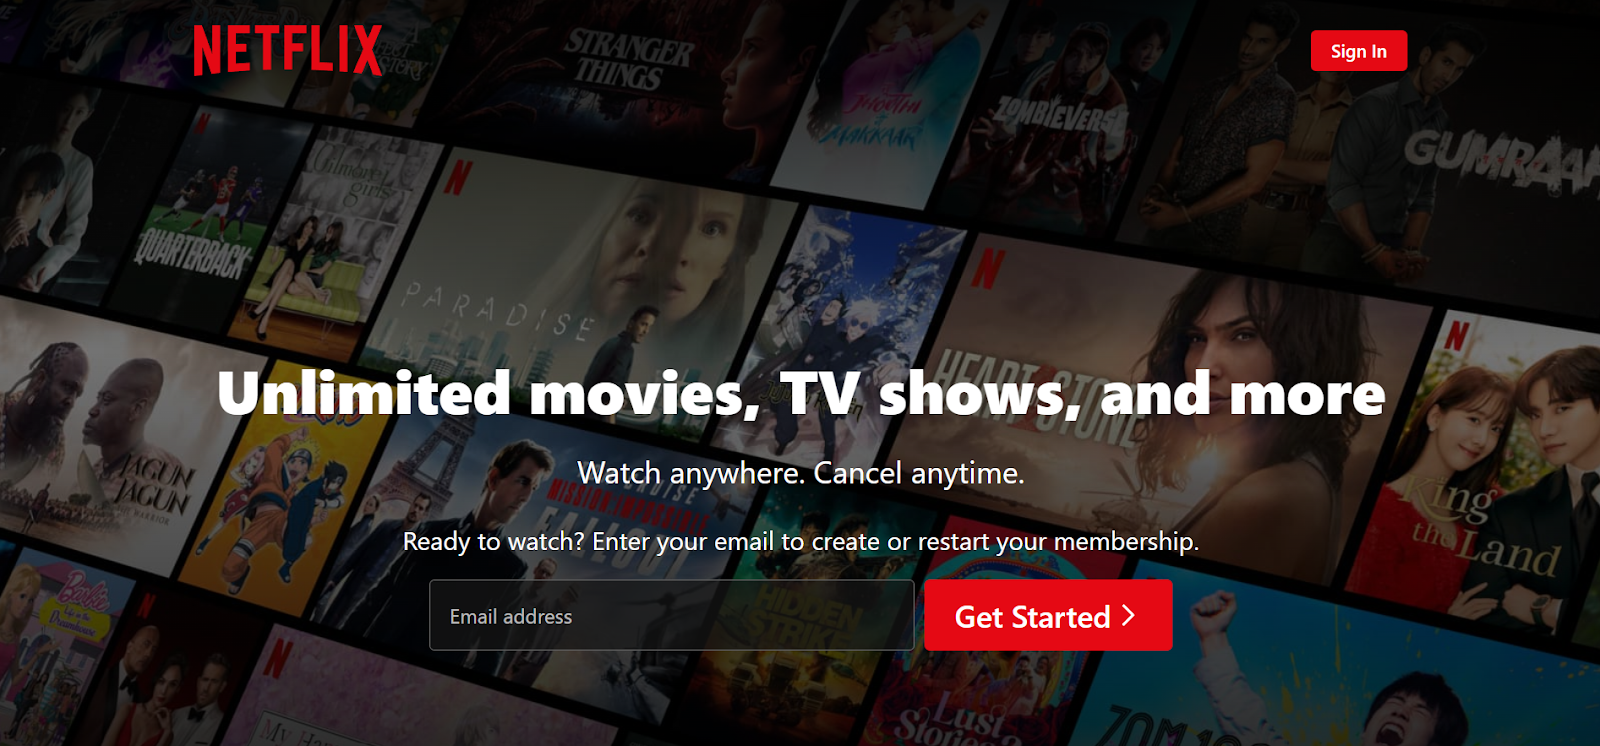 Netflix is using a dark background in their onboarding page.